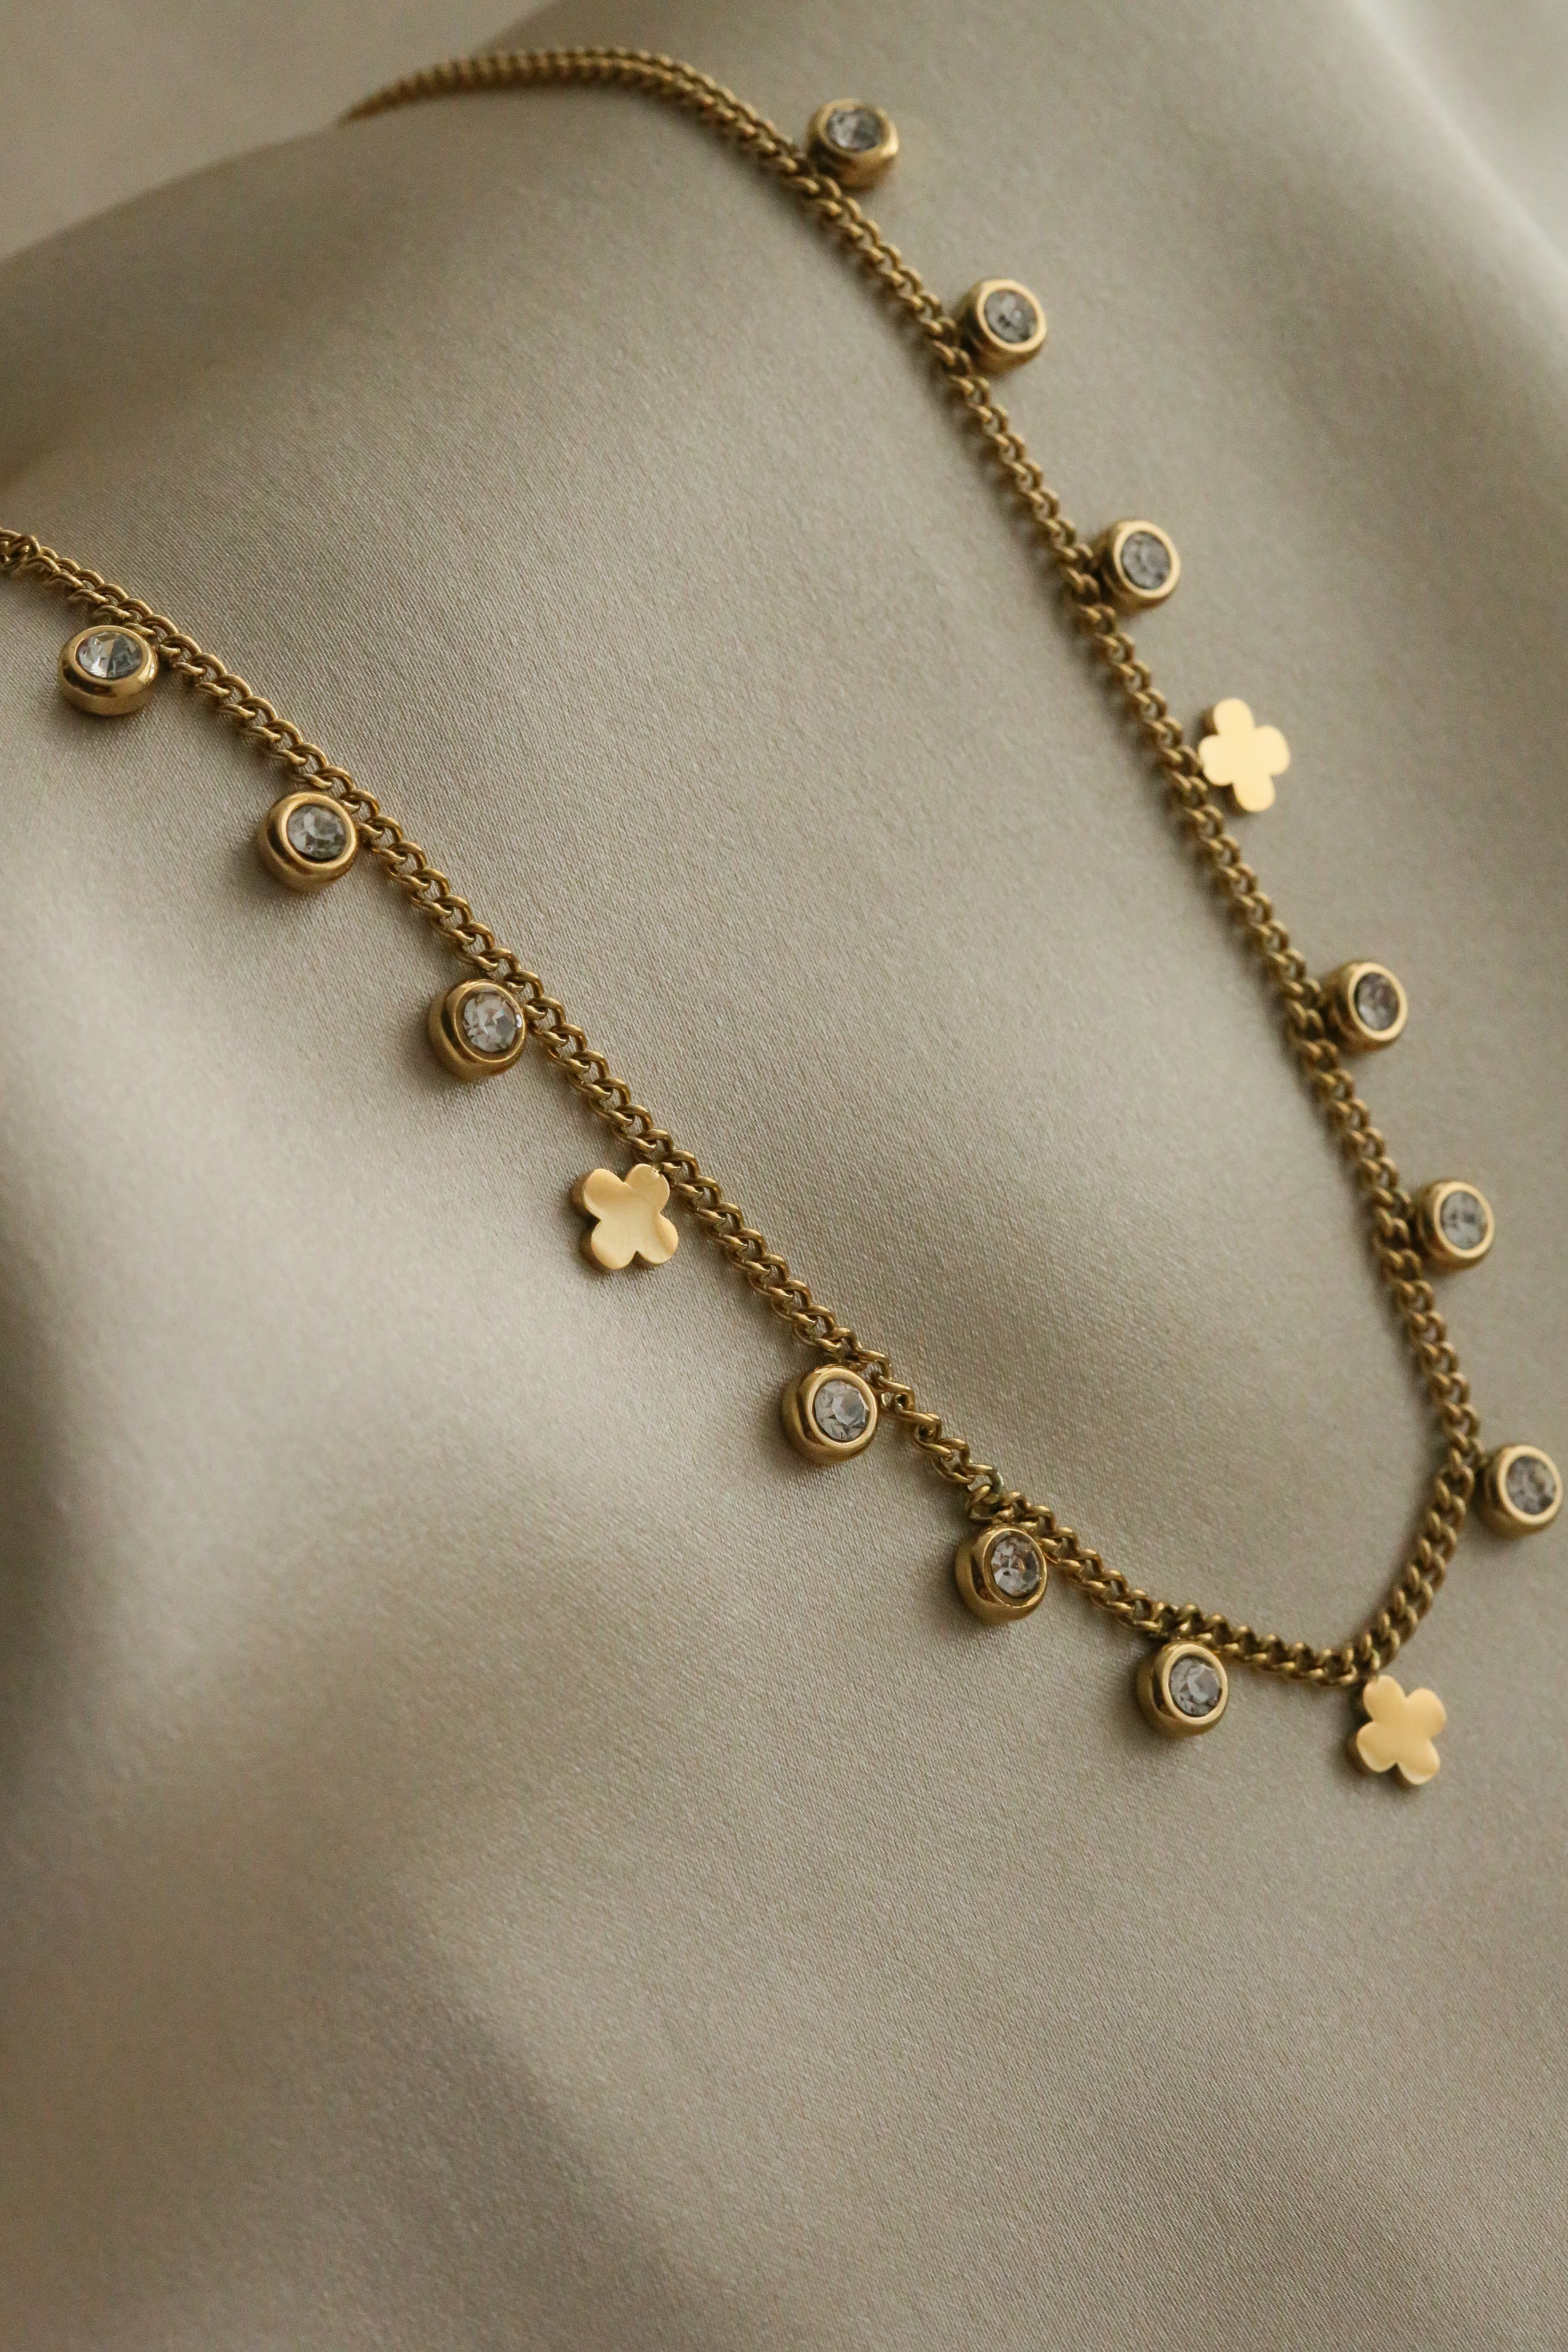 Tamara Necklace - Boutique Minimaliste has waterproof, durable, elegant and vintage inspired jewelry